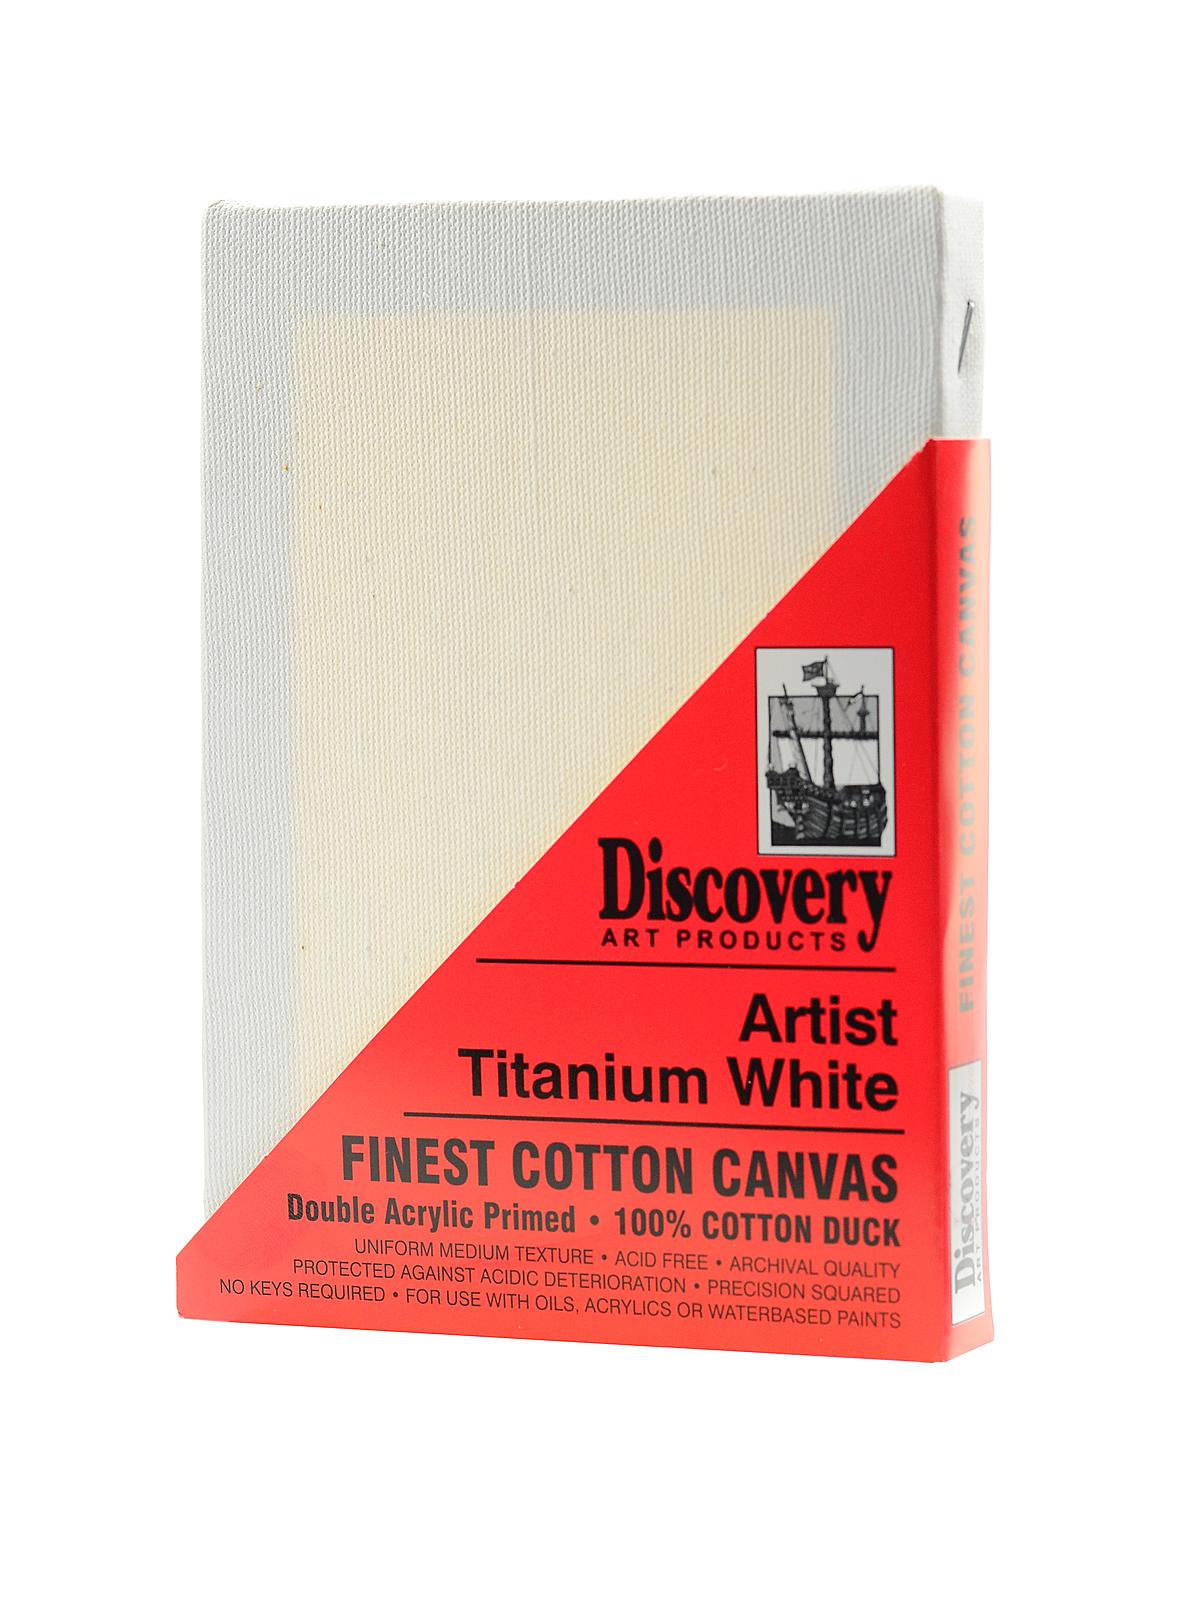 Finest Stretched Cotton Canvas White 5 In. X 7 In. Each